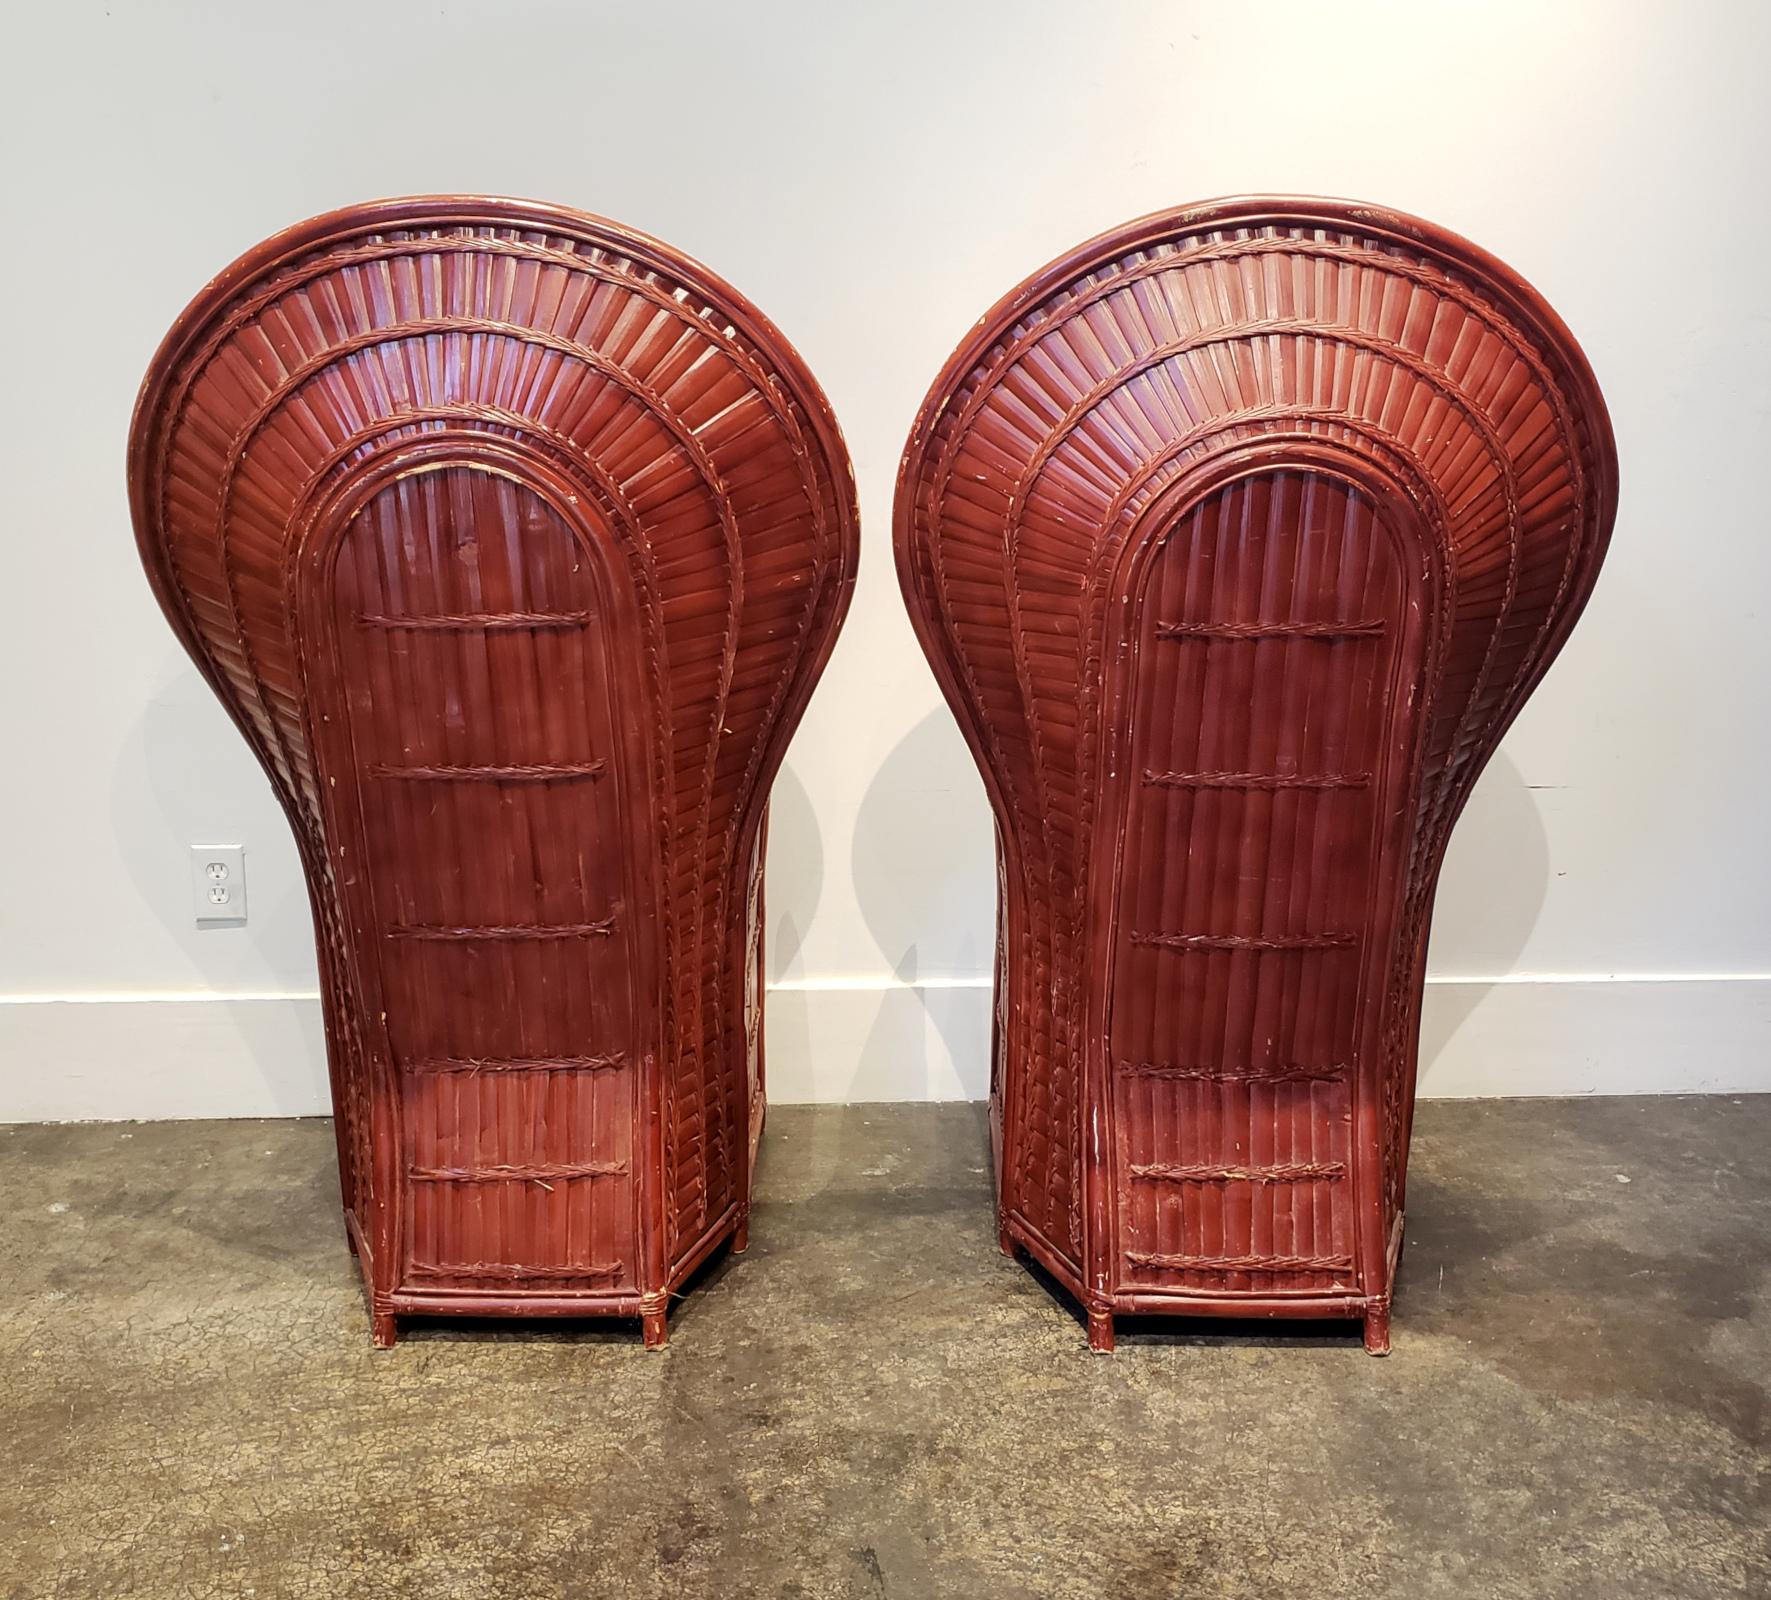 Hollywood Regency Pair of Vintage Rattan Bamboo Peacock Chairs